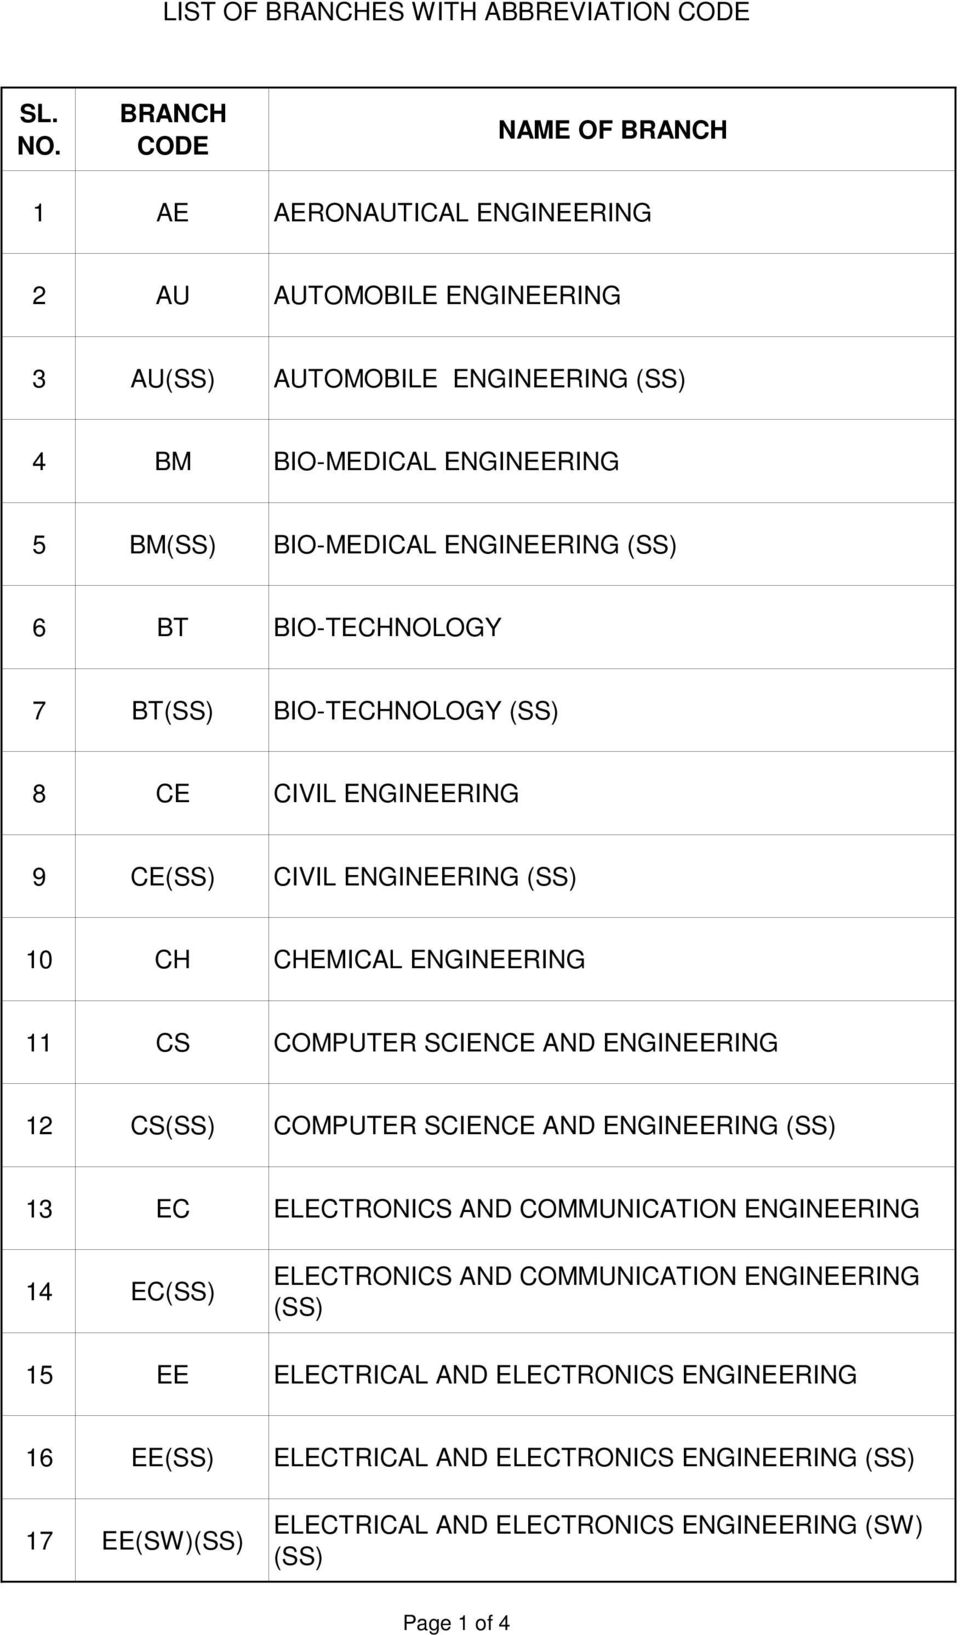 11 CS COMPUTER SCIENCE AND ENGINEERING 12 CS(SS) COMPUTER SCIENCE AND ENGINEERING (SS) 13 EC ELECTRONICS AND COMMUNICATION ENGINEERING 14 EC(SS) ELECTRONICS AND COMMUNICATION